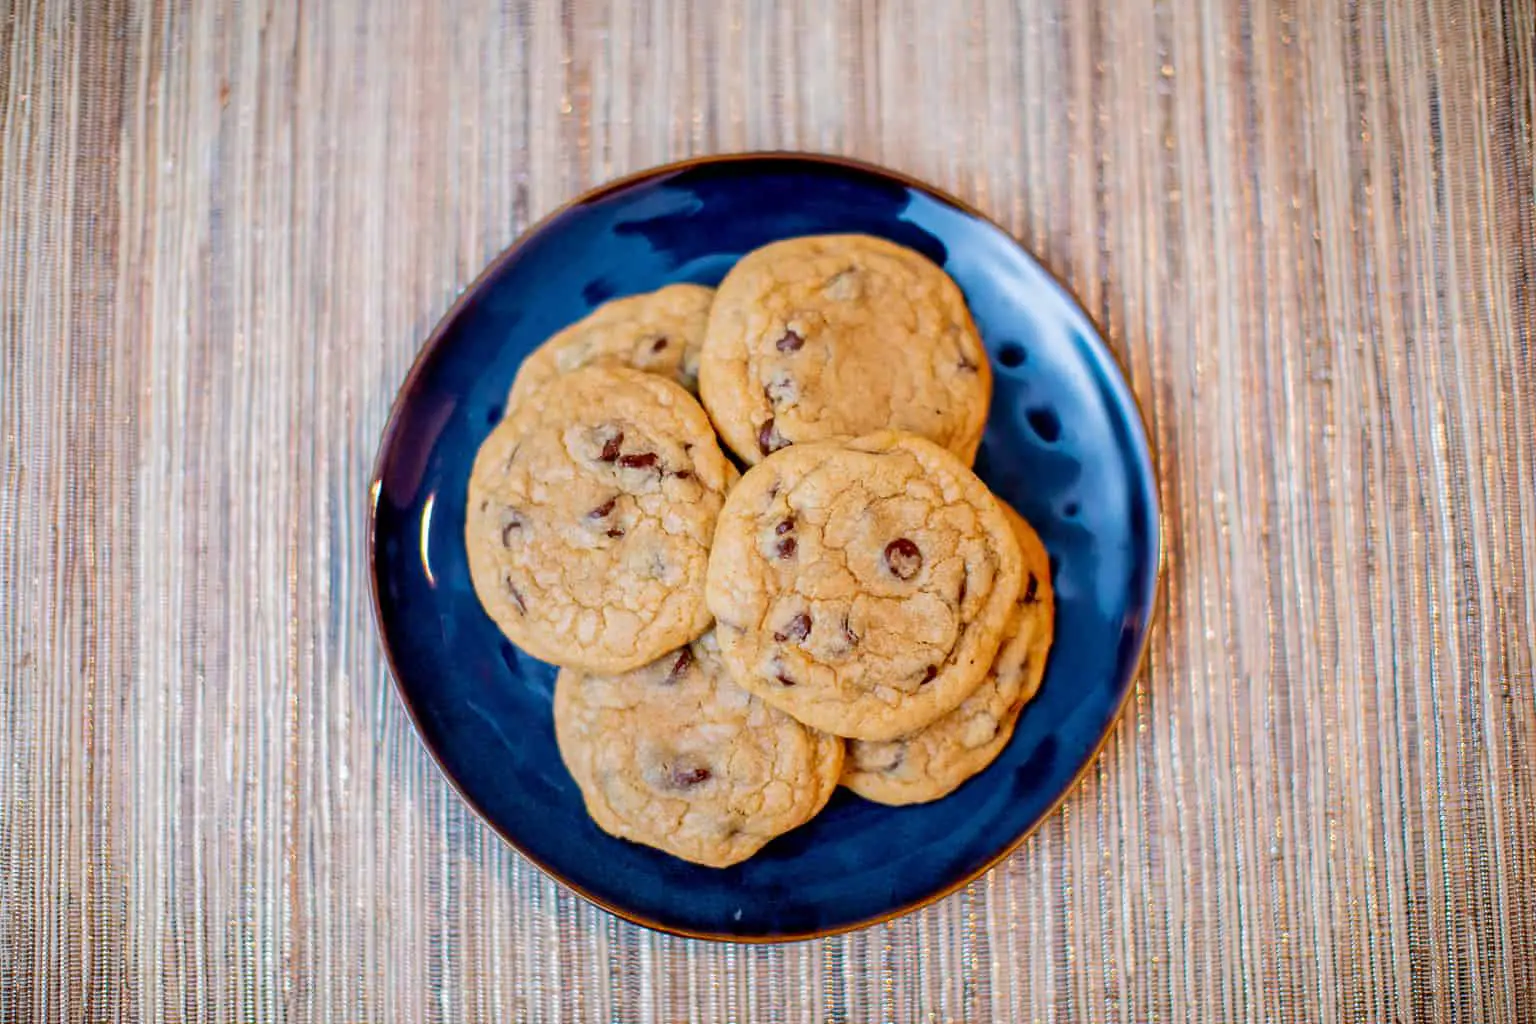 A plate of chewy chocolate cookies